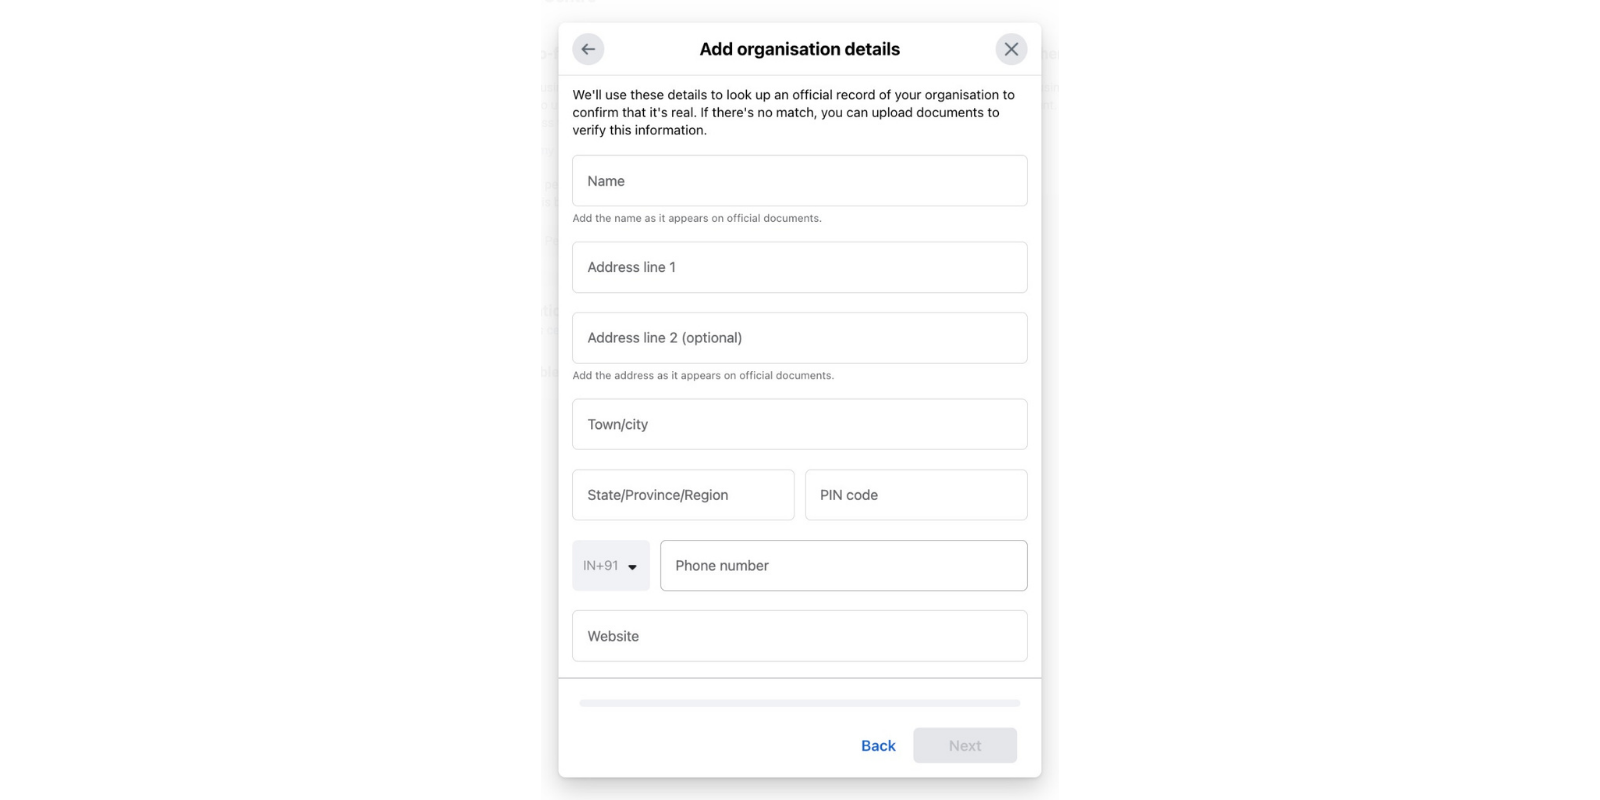 Fill your Organization details